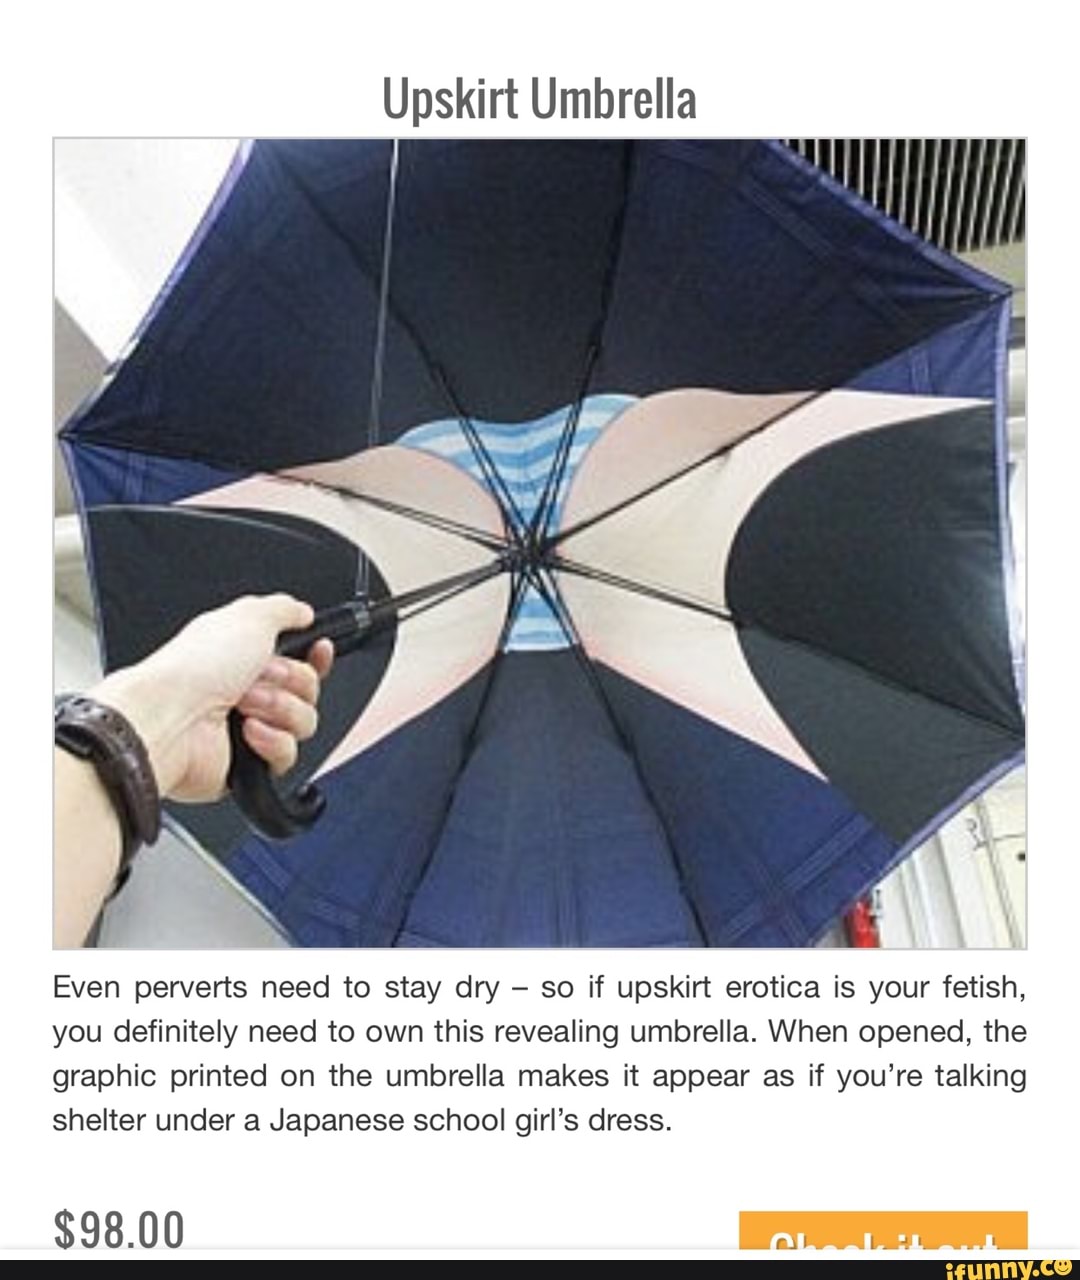 Upskirt Umbrellas Are A Rage In Japan.